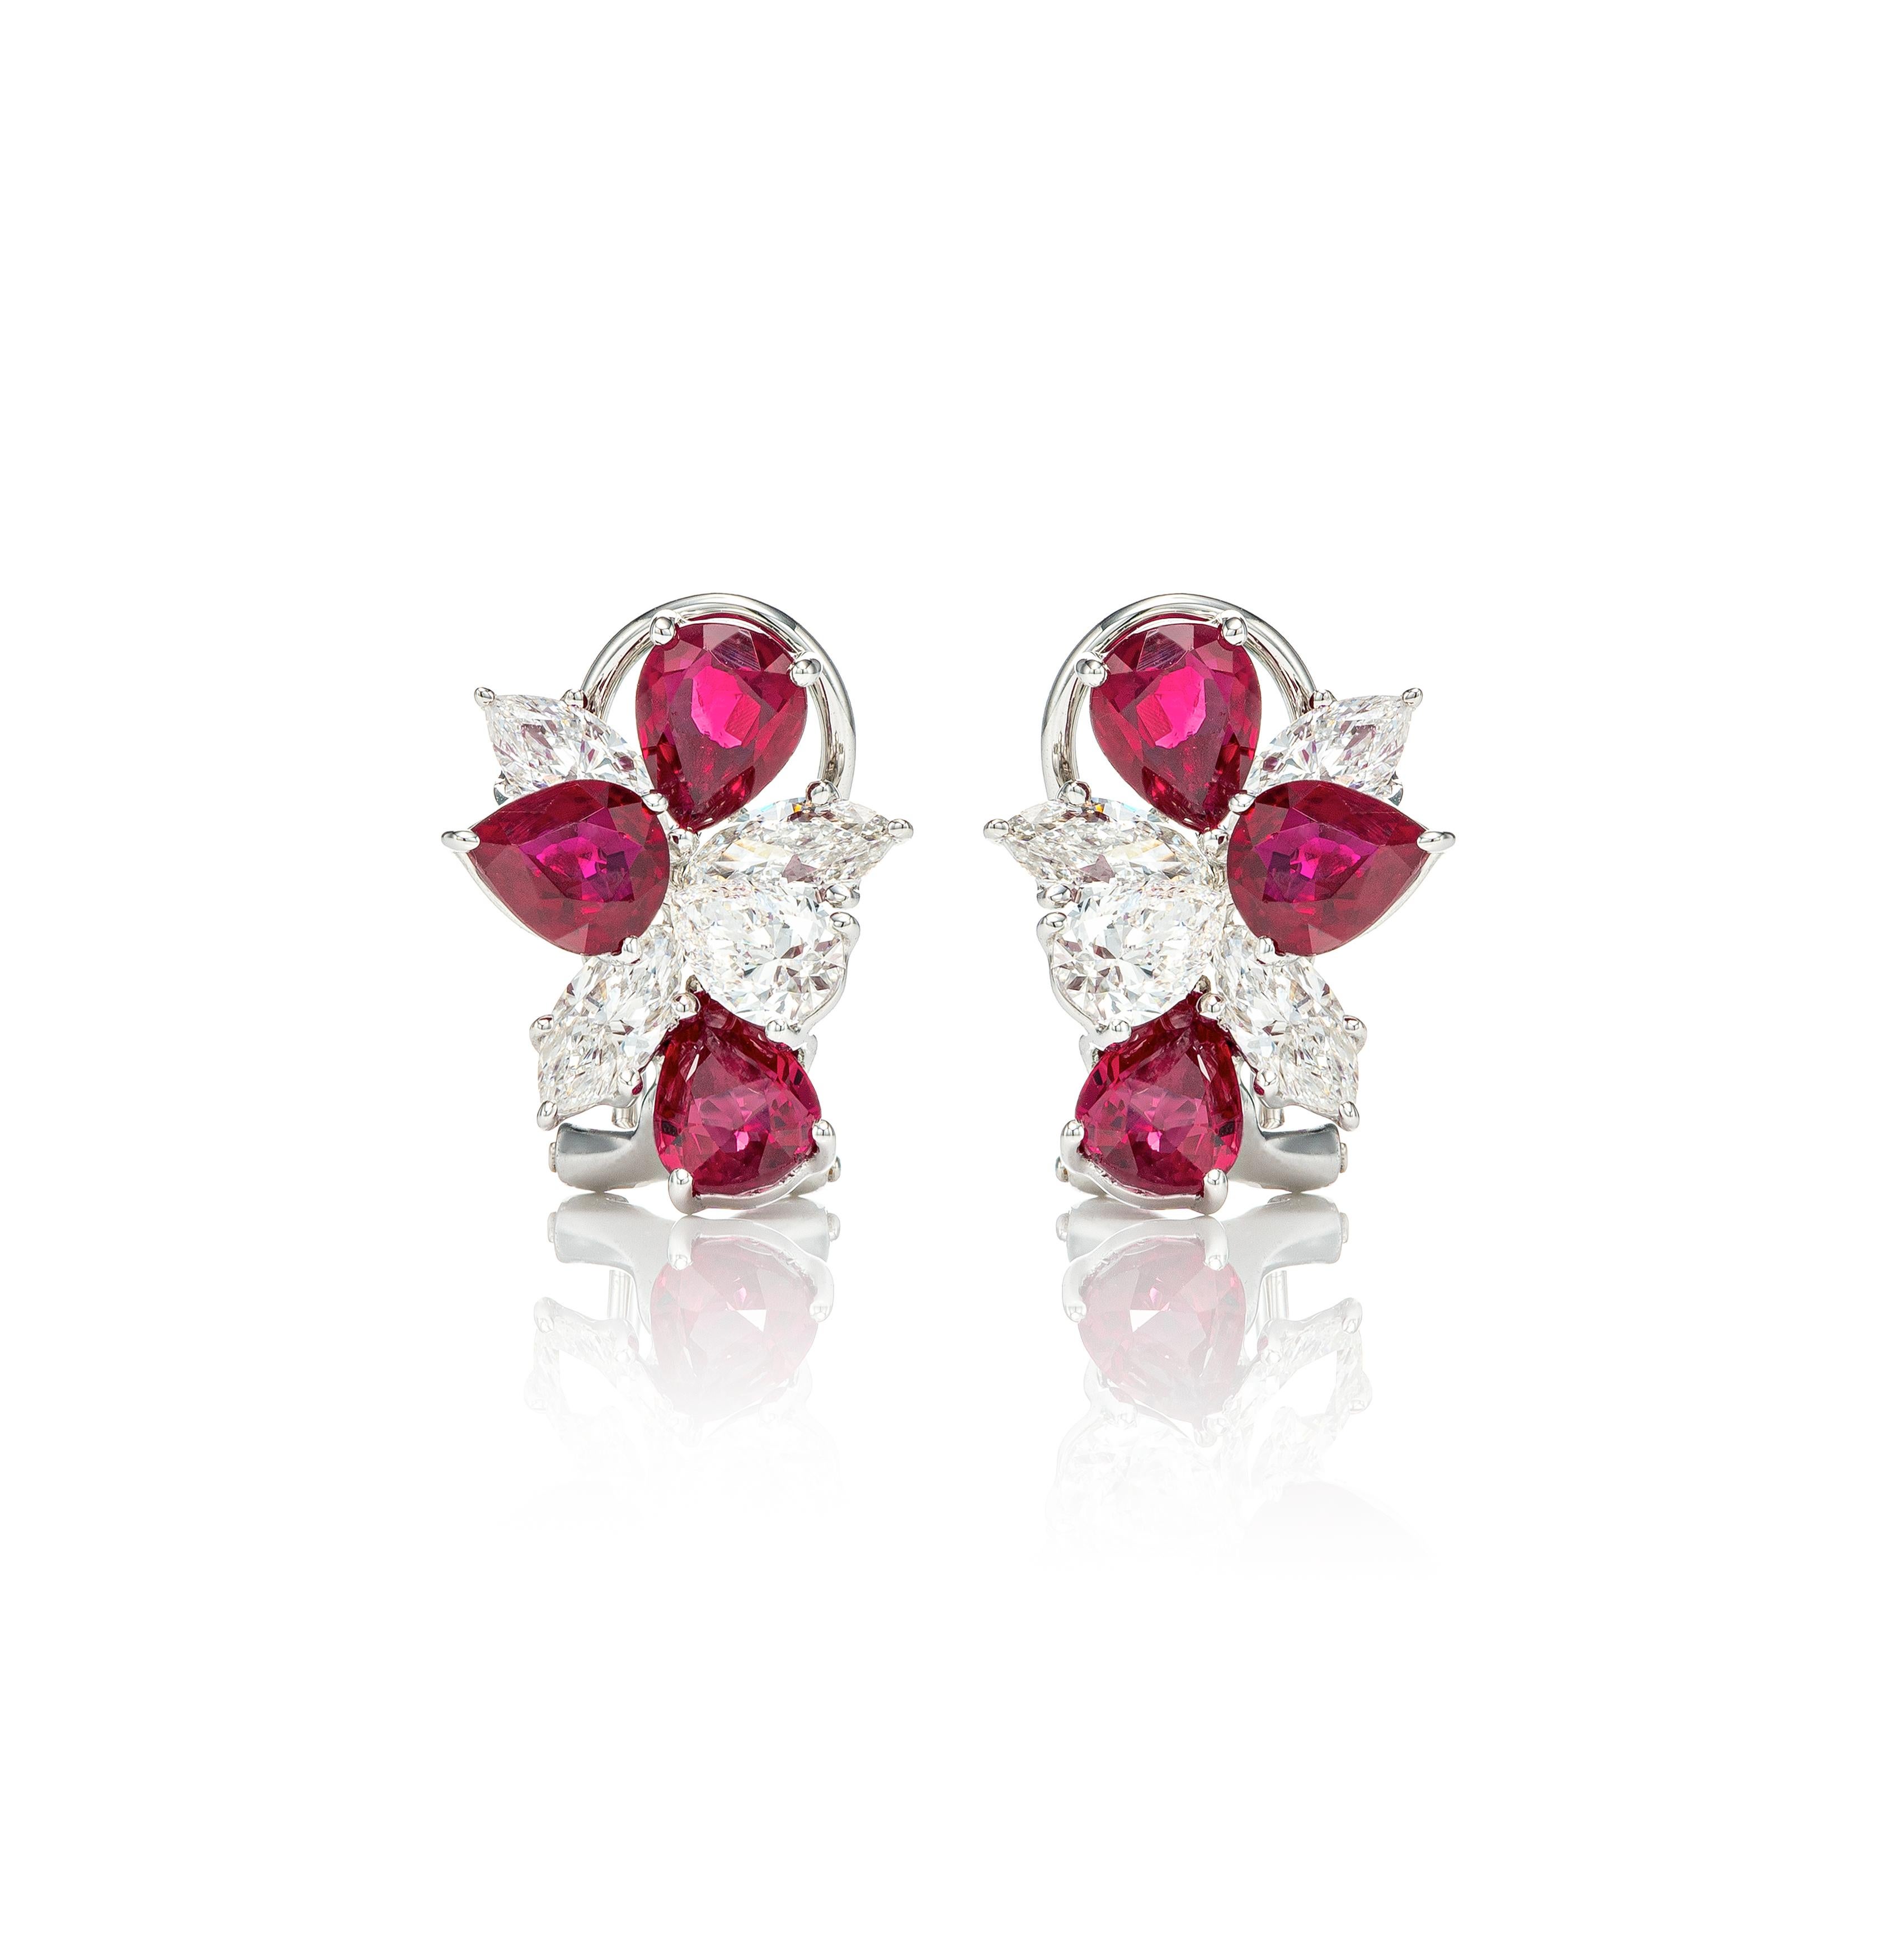 Contemporary 3.89 Carat Pear Shape Ruby and Diamond Cluster Earrings in 18K White Gold For Sale